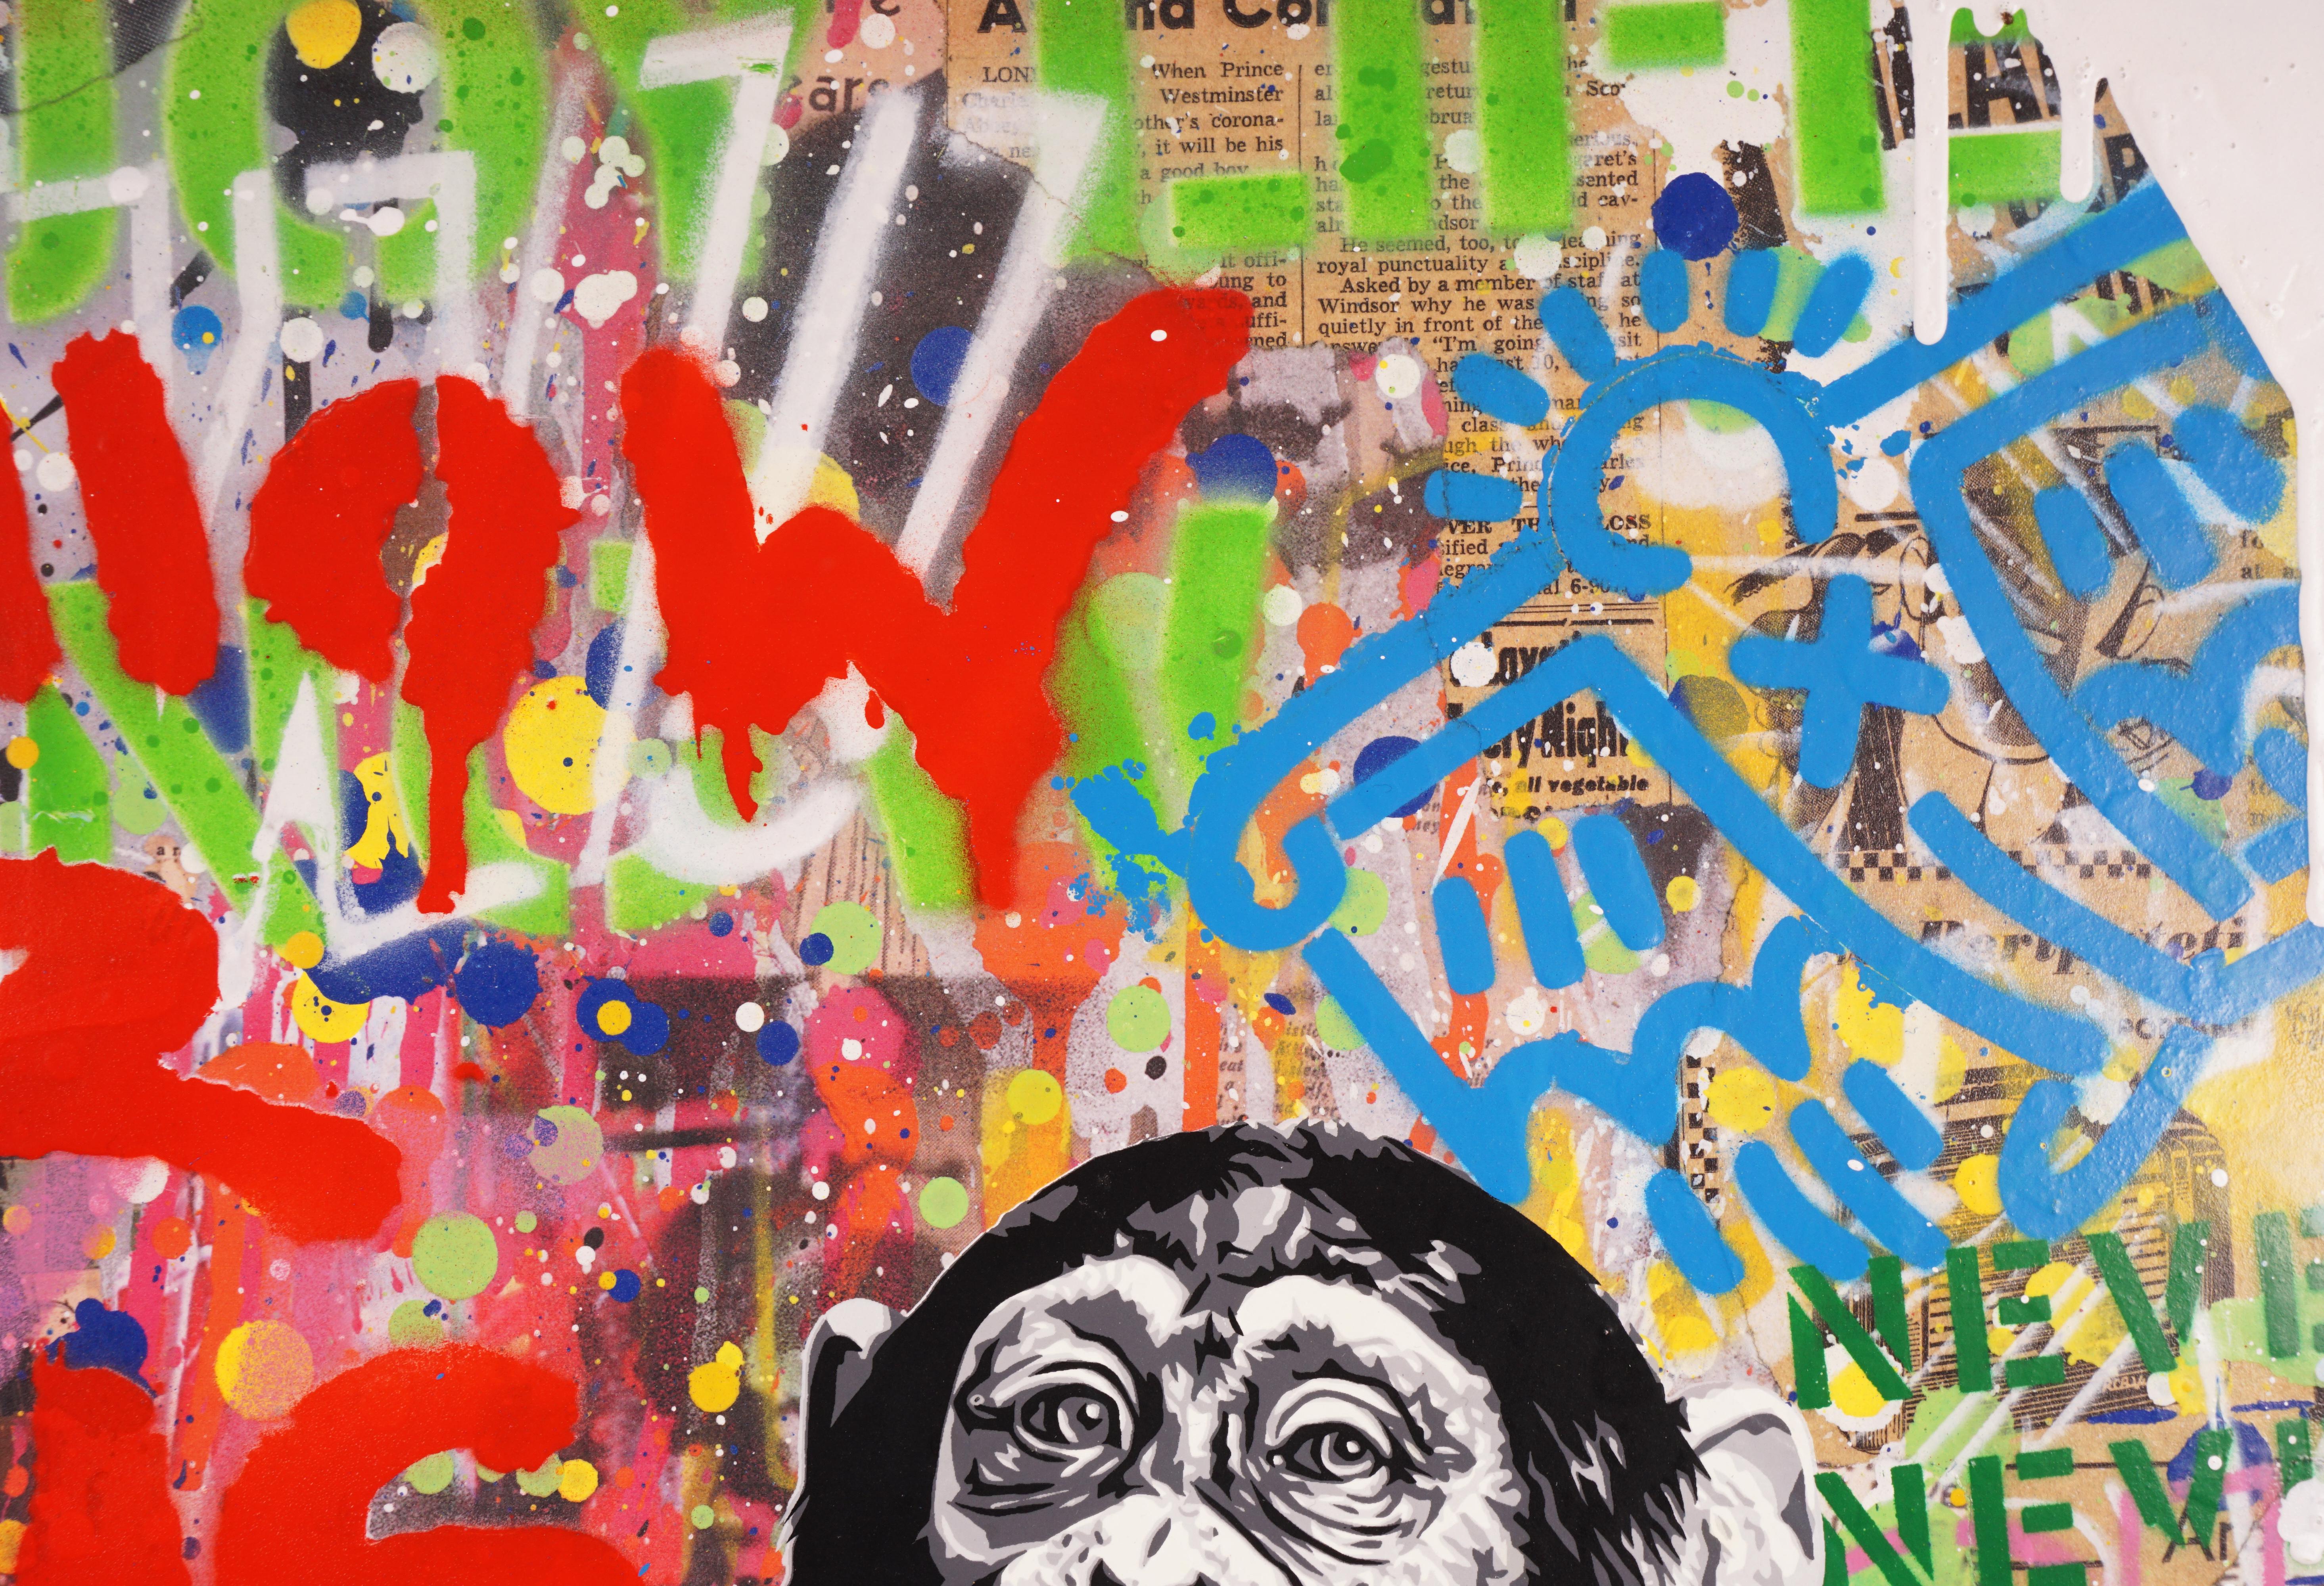 The unique street pop art 'Enjoy Life' monkey painting by french contemporary street-artist, Mr. Brainwash was created in 2021. The brightly spray painted, layered, and paint dripped signature style of the contemporary artist has become an instantly